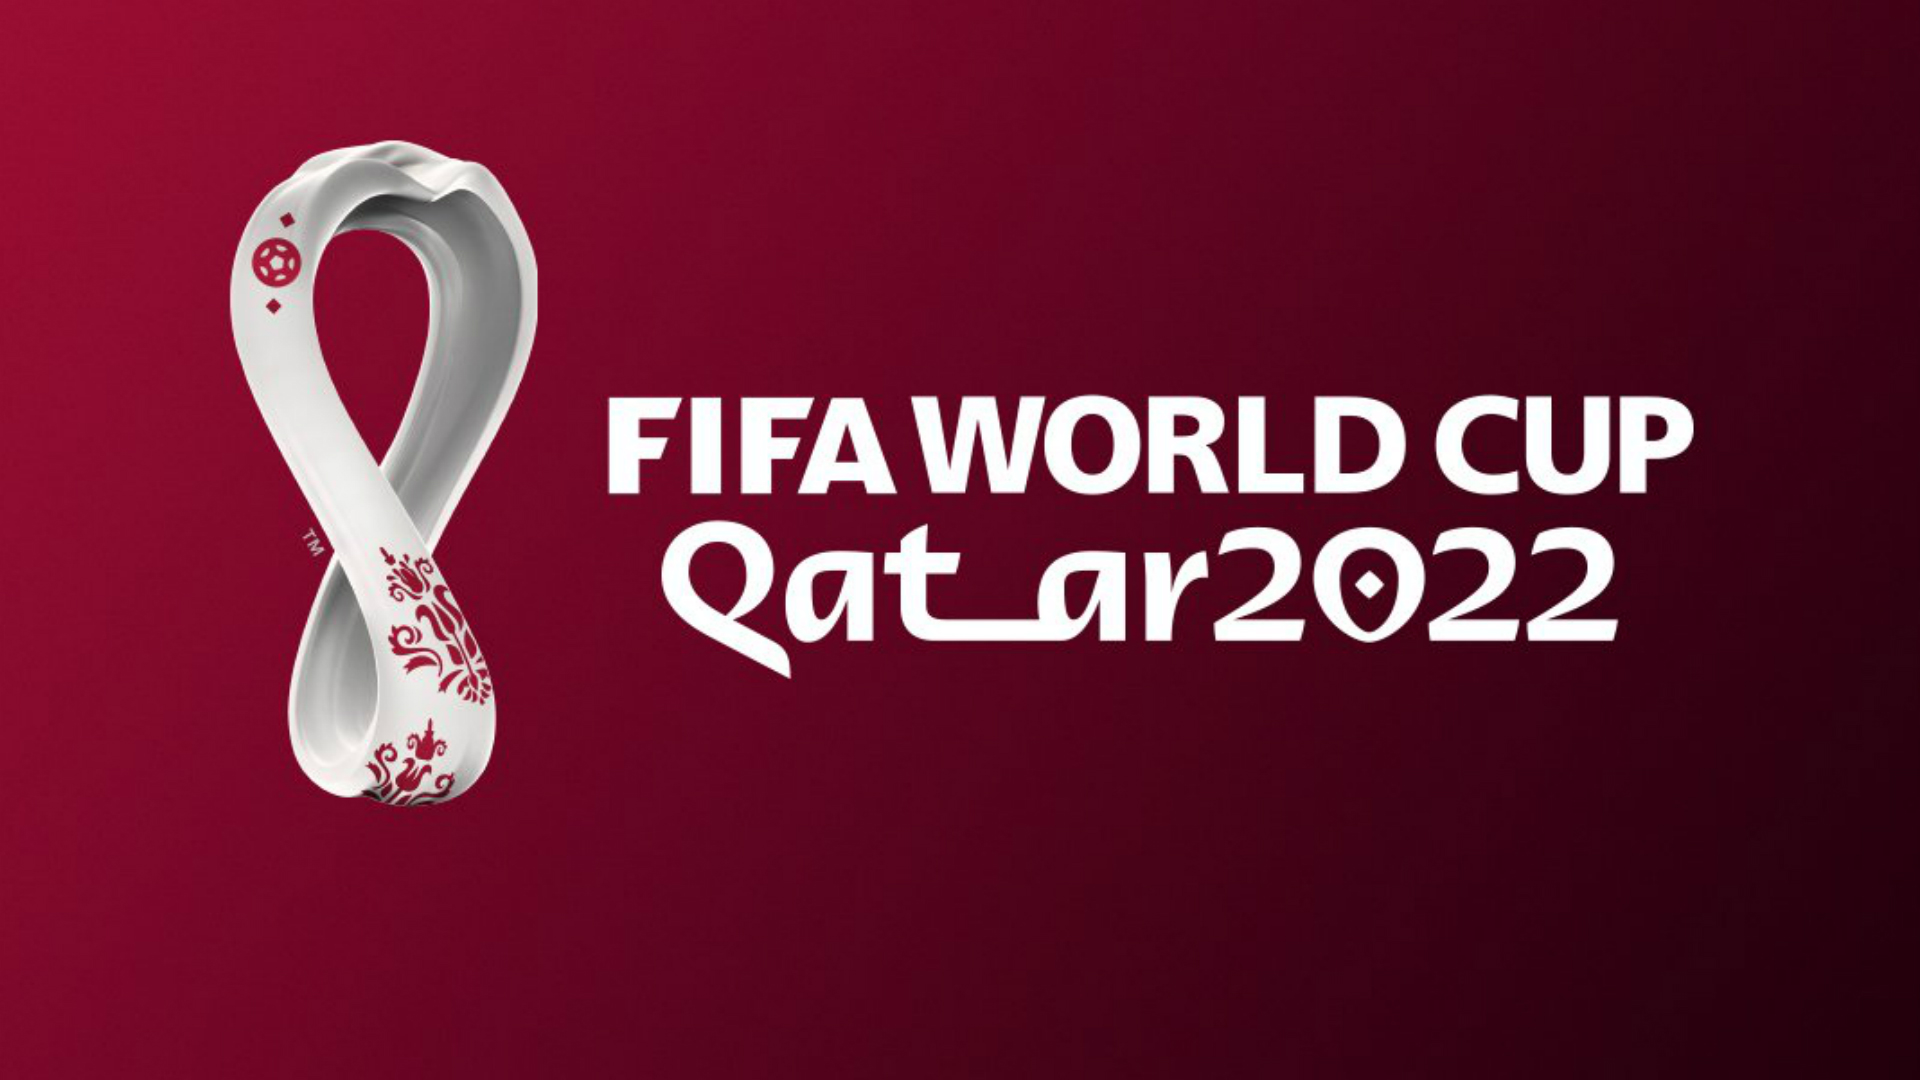 World Cup 2022 emblem revealed as Qatar vows to 'connect the entire world'